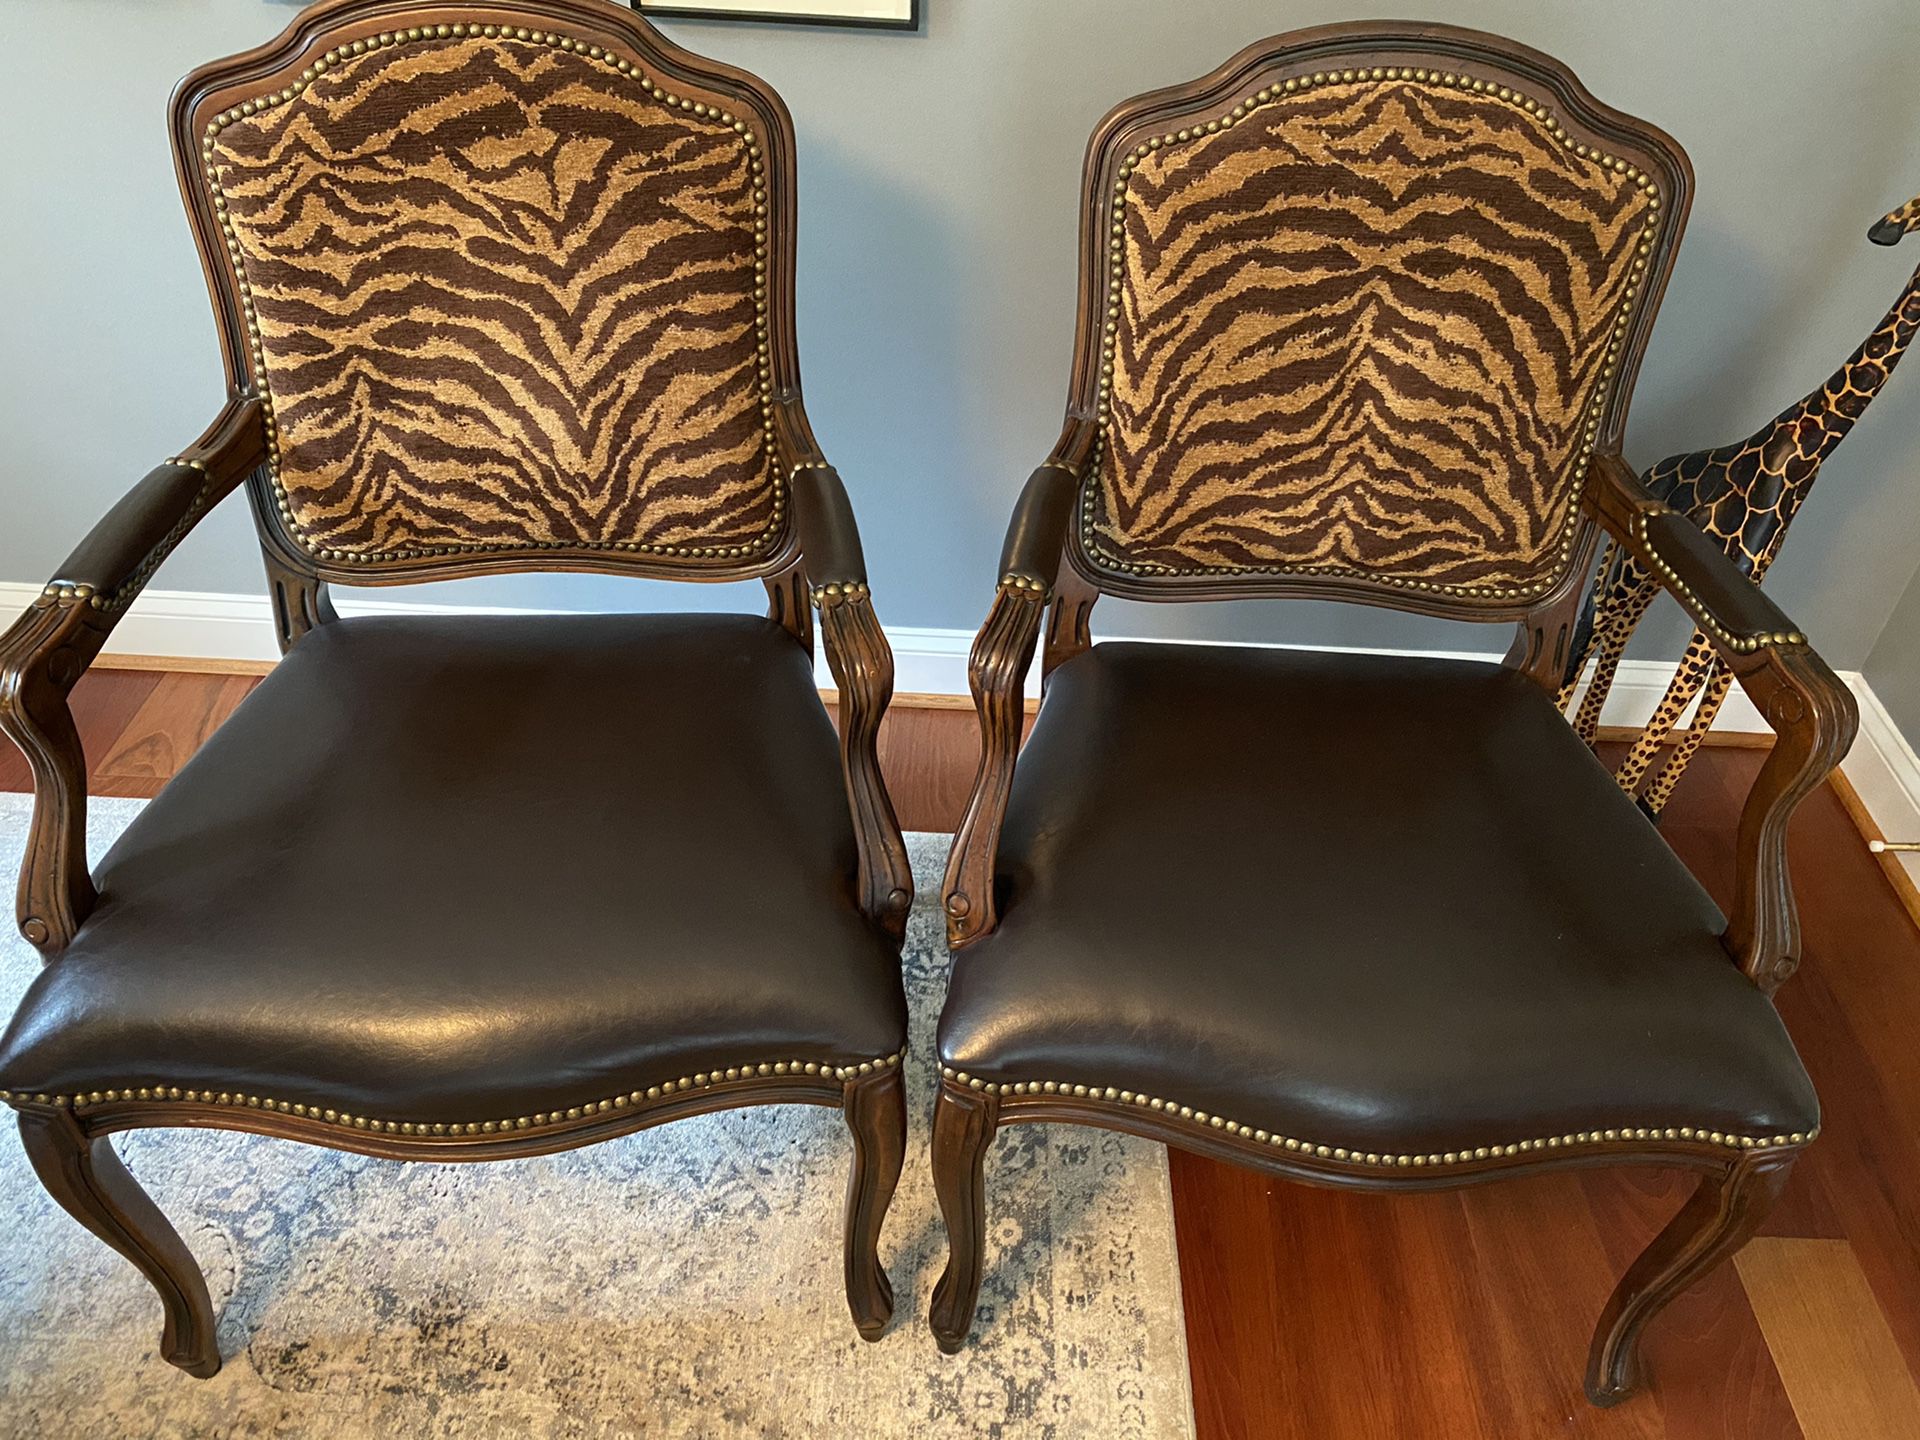 Occasional Chairs with animal print backs and rich leather seats.